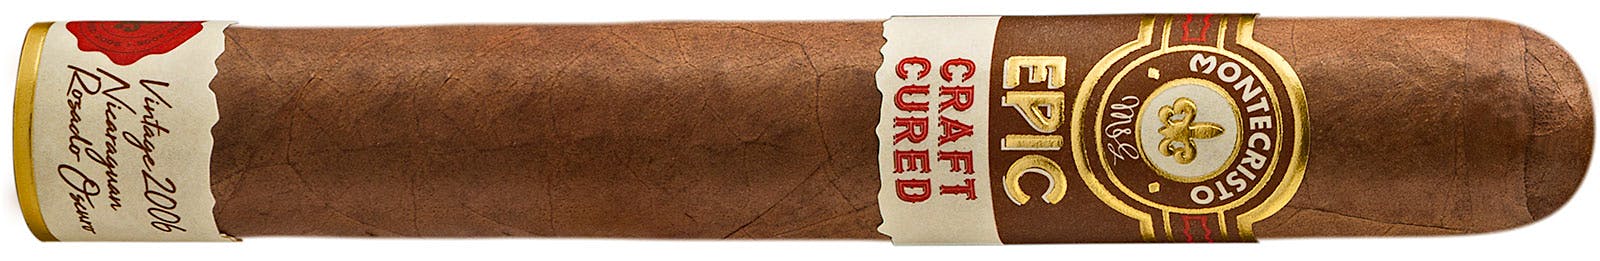 Craft Cured's aged wrapper is denoted on the cigar's footband.